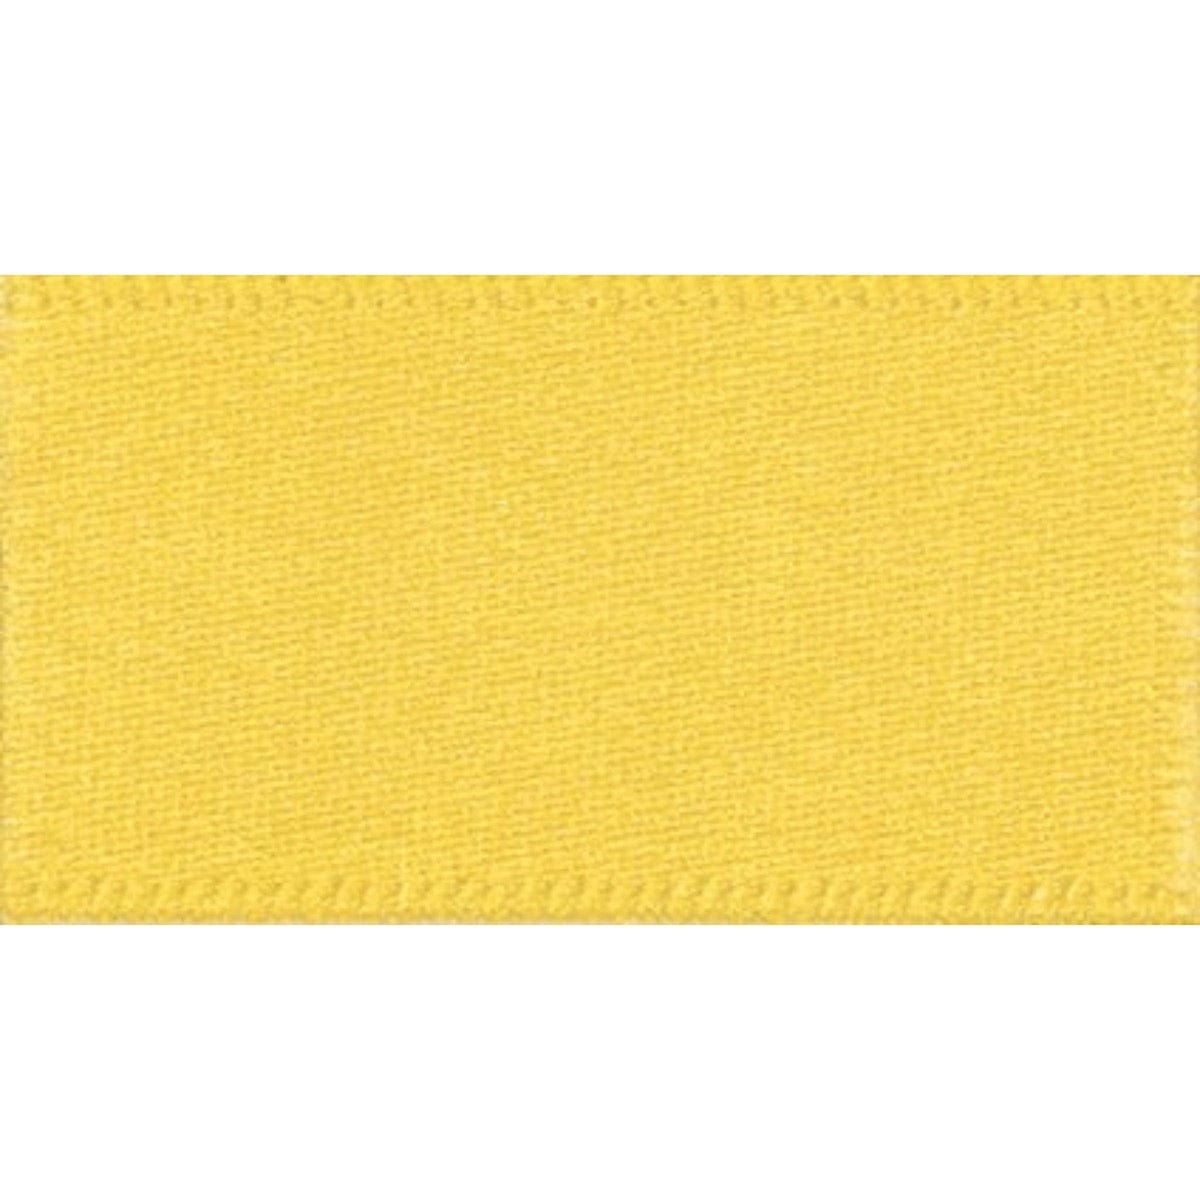 Double Faced Satin Ribbon Yellow: 3mm wide. Price per metre.